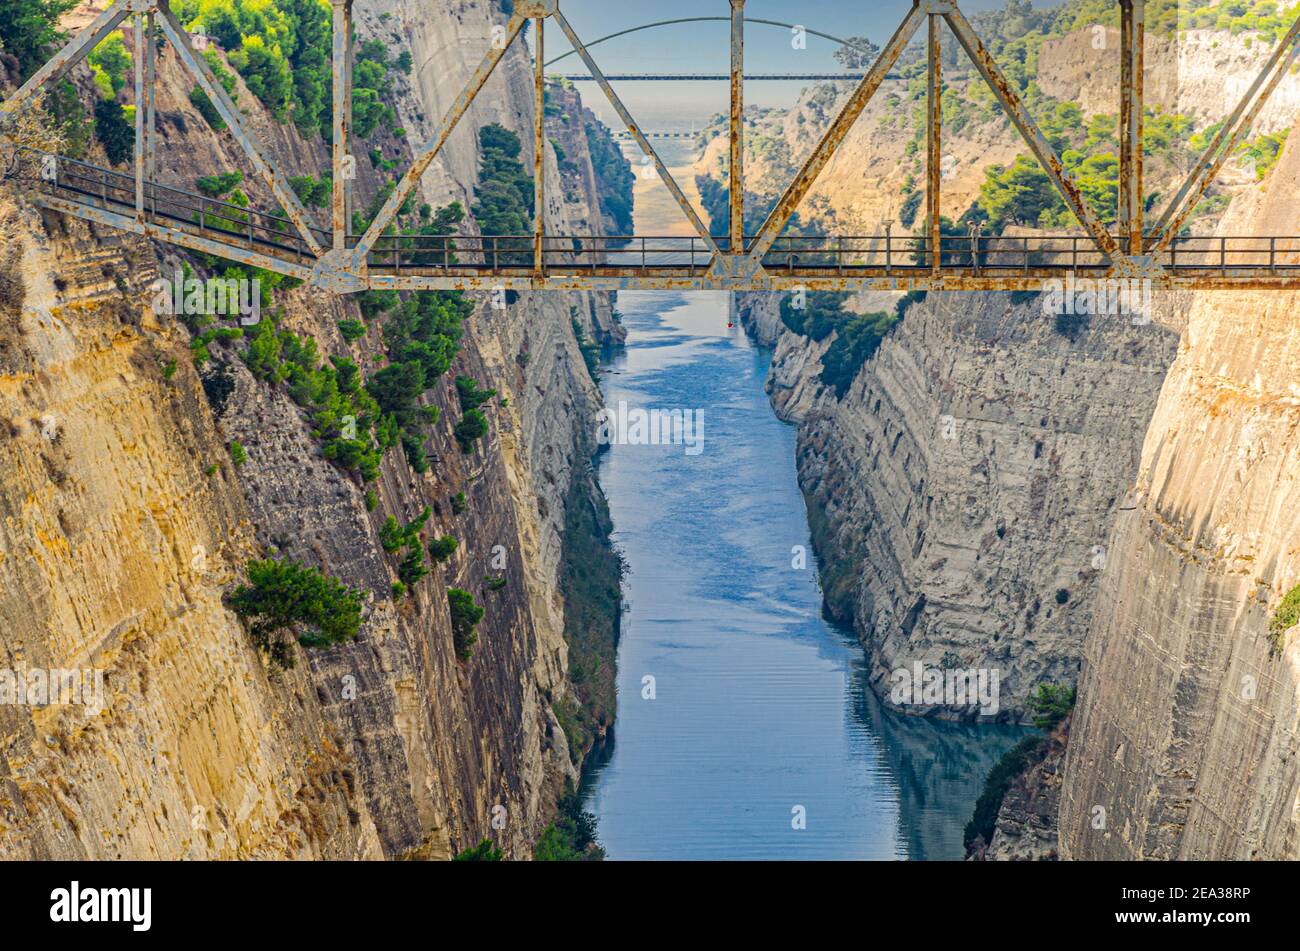 view of Corinth canal witch connects the Gulf of Corinth in the Ionian Sea with the Saronic Gulf. Greece Stock Photo